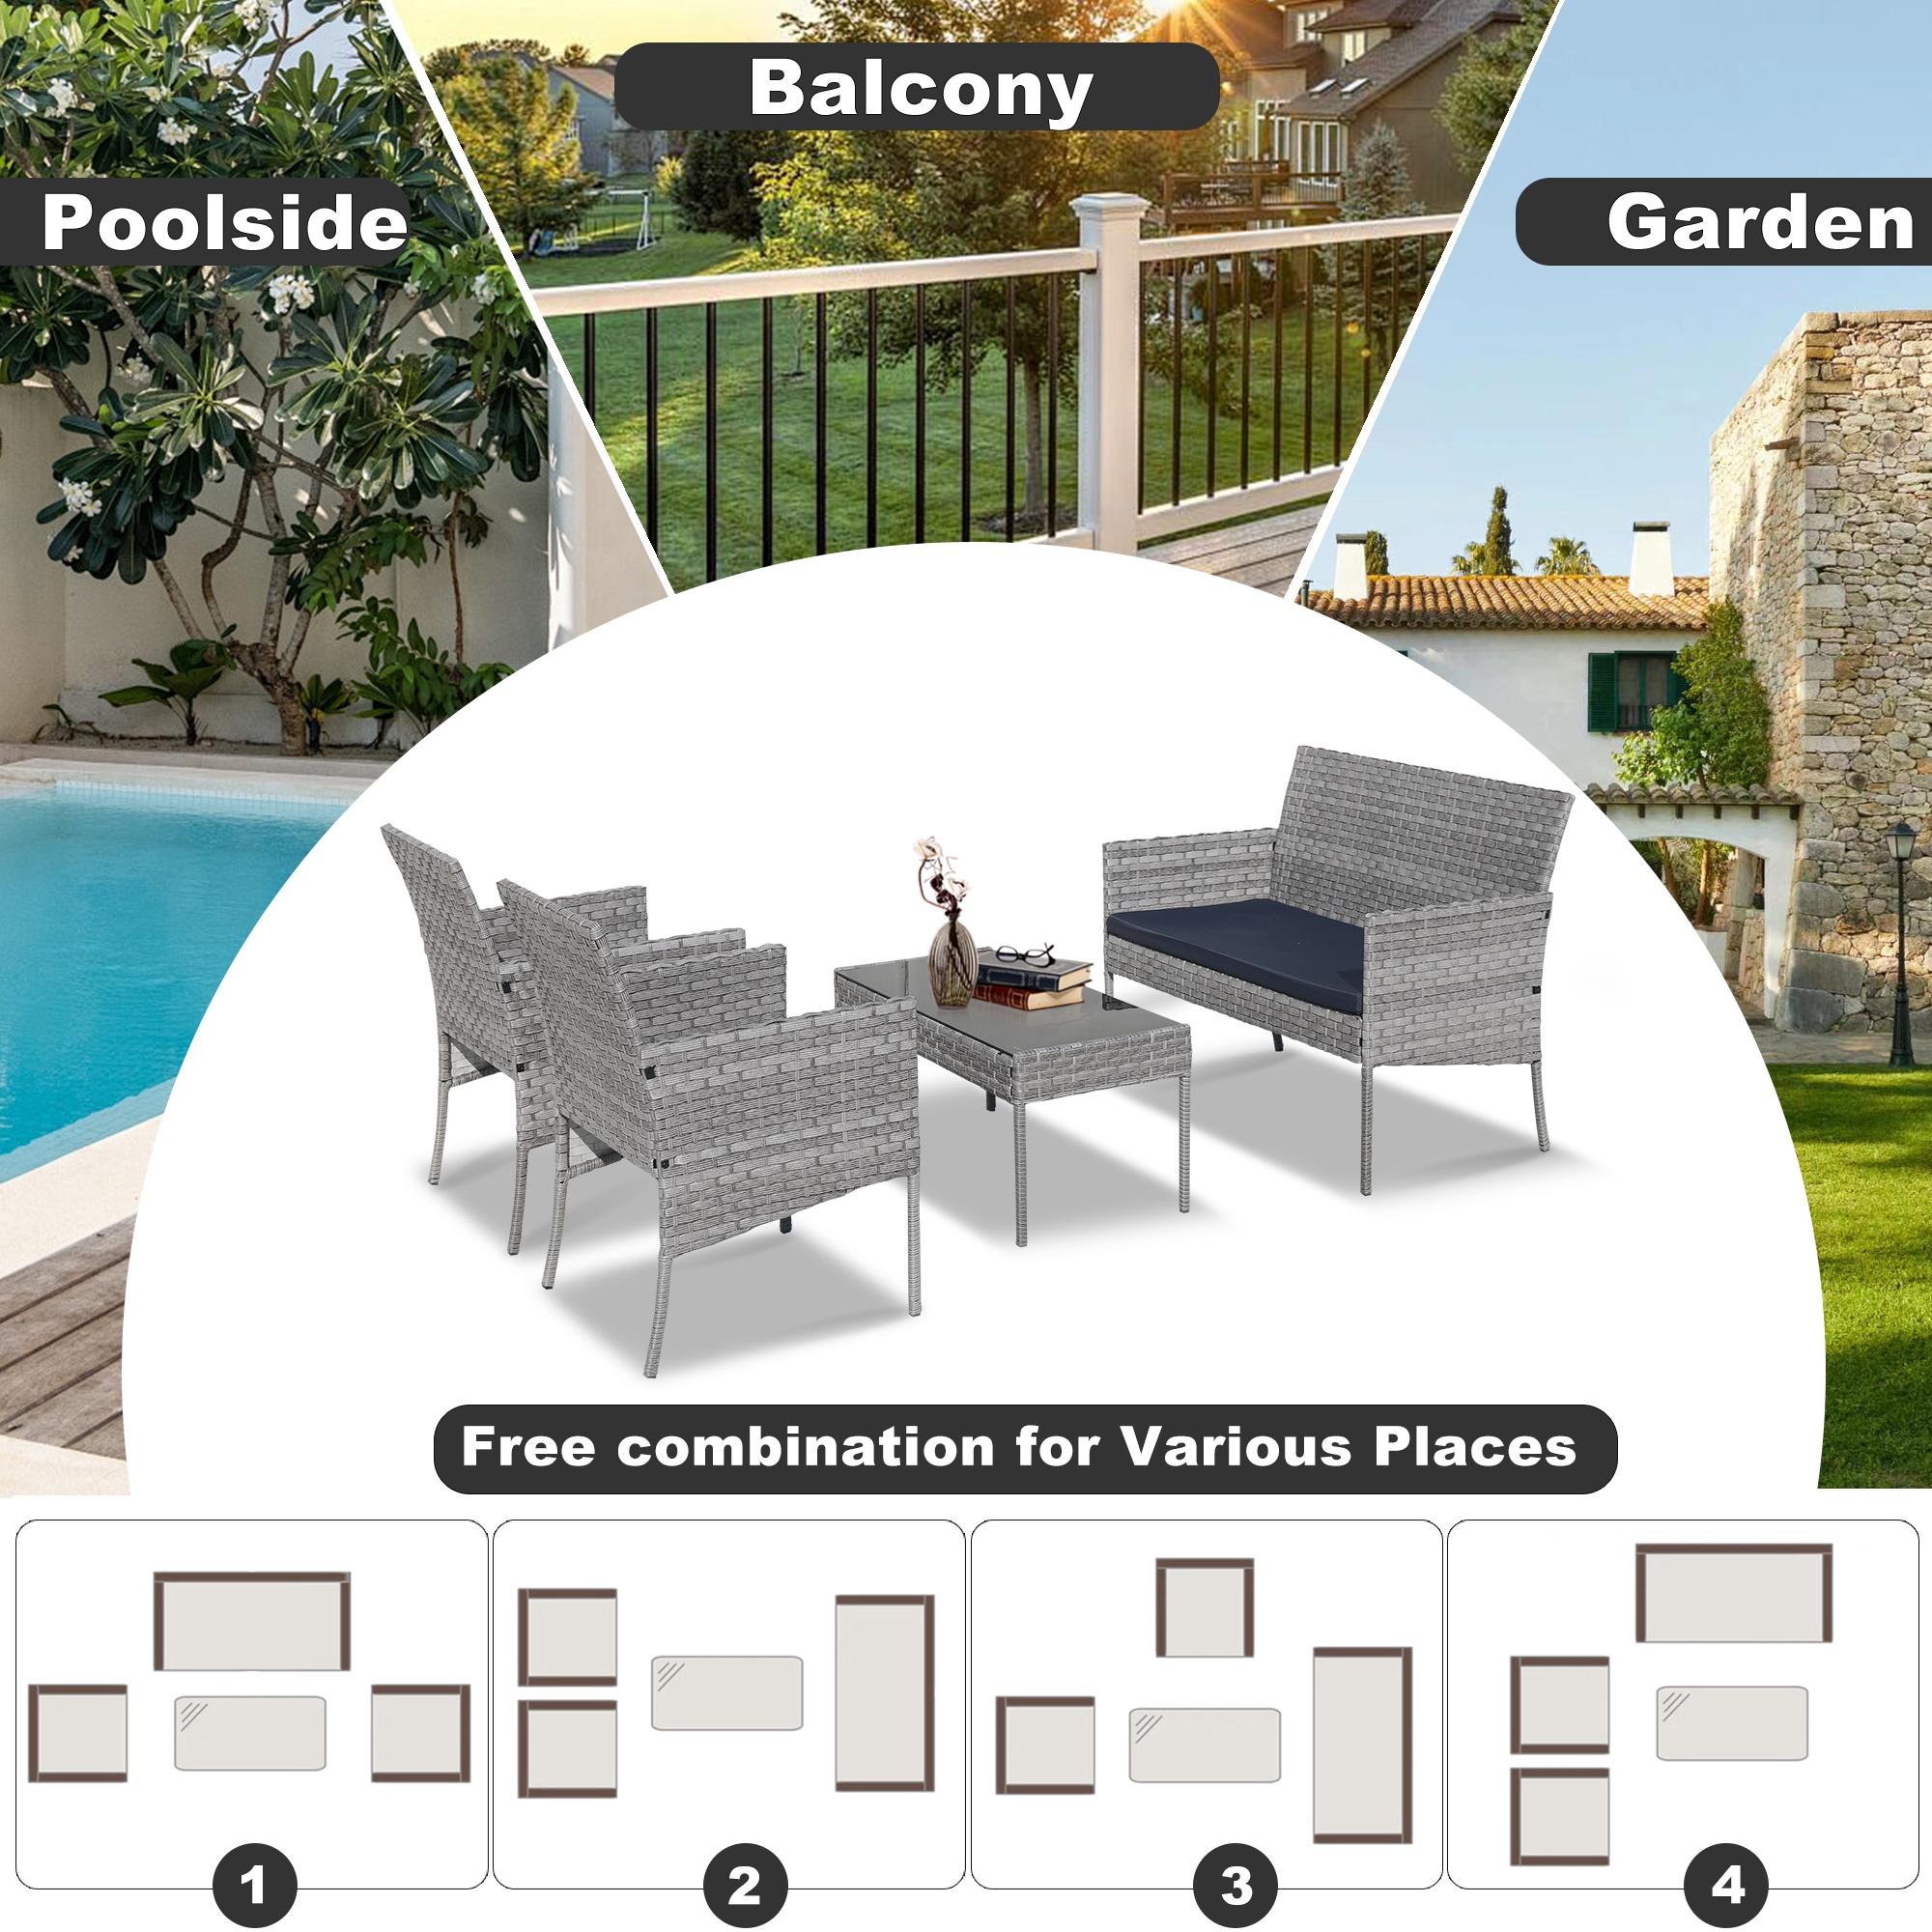 Outdoor Patio Furniture Set, Seizeen 4 Pieces Rattan Conversation Set Cushioned Sofa & Charis, Deck Garden Poolside Furniture Table Set for 4, Gray - image 4 of 11